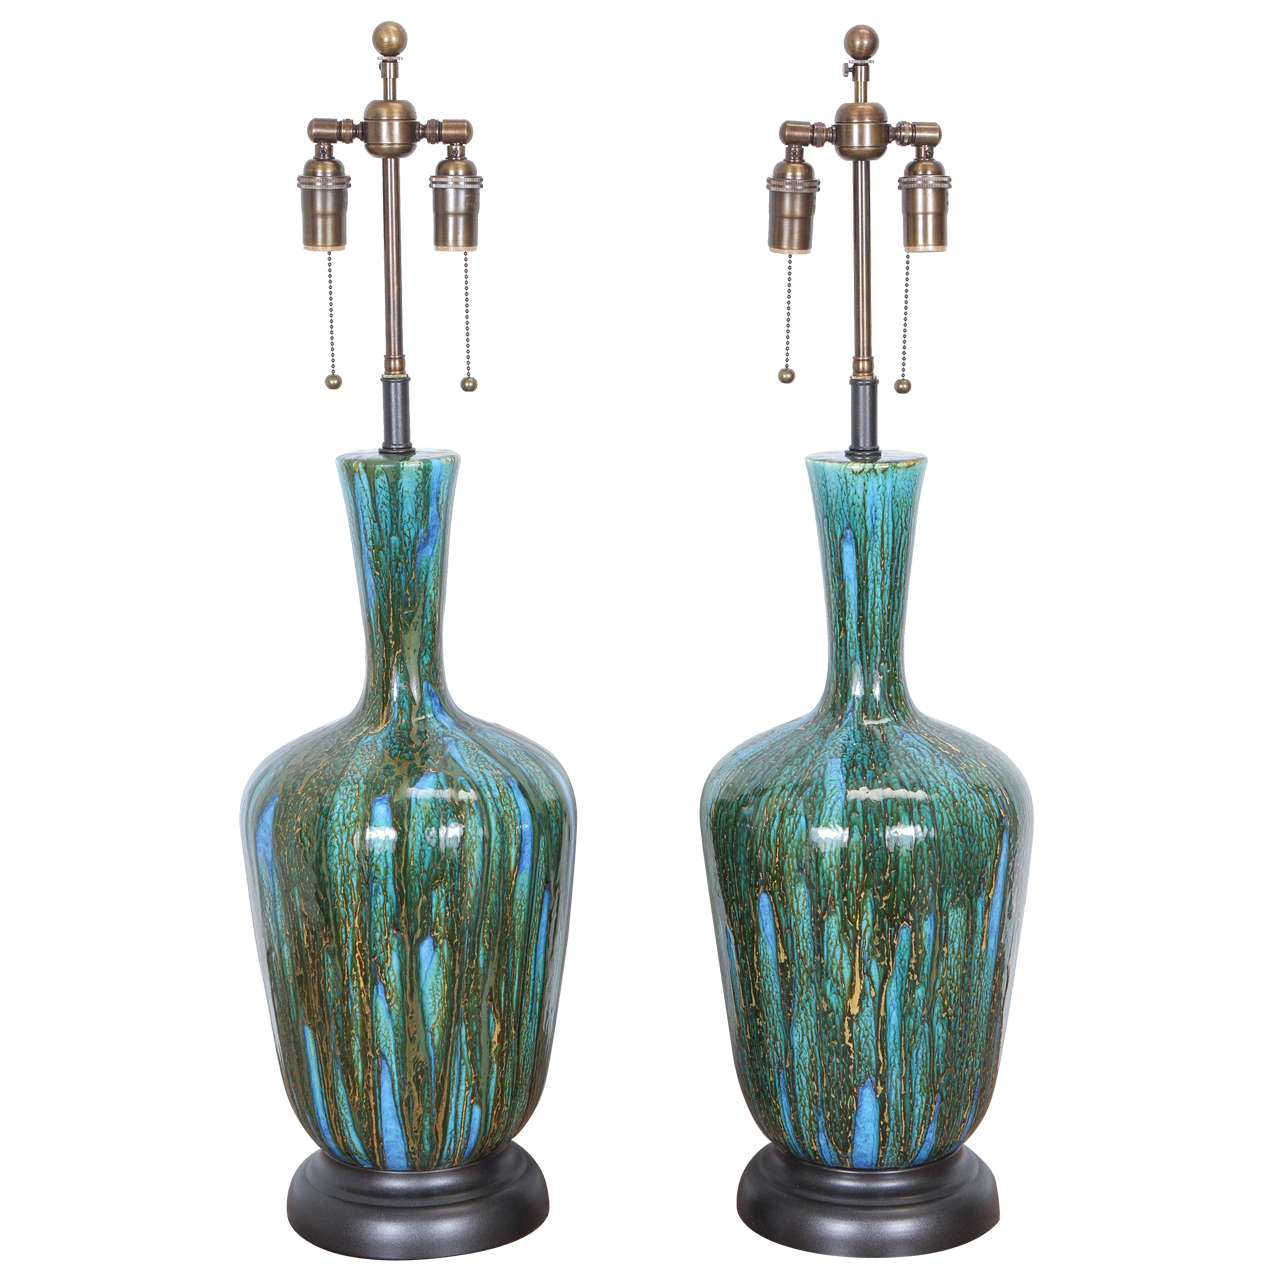 Lovely Pair of Ceramic Table Lamps with a Gorgeous Drip Glaze